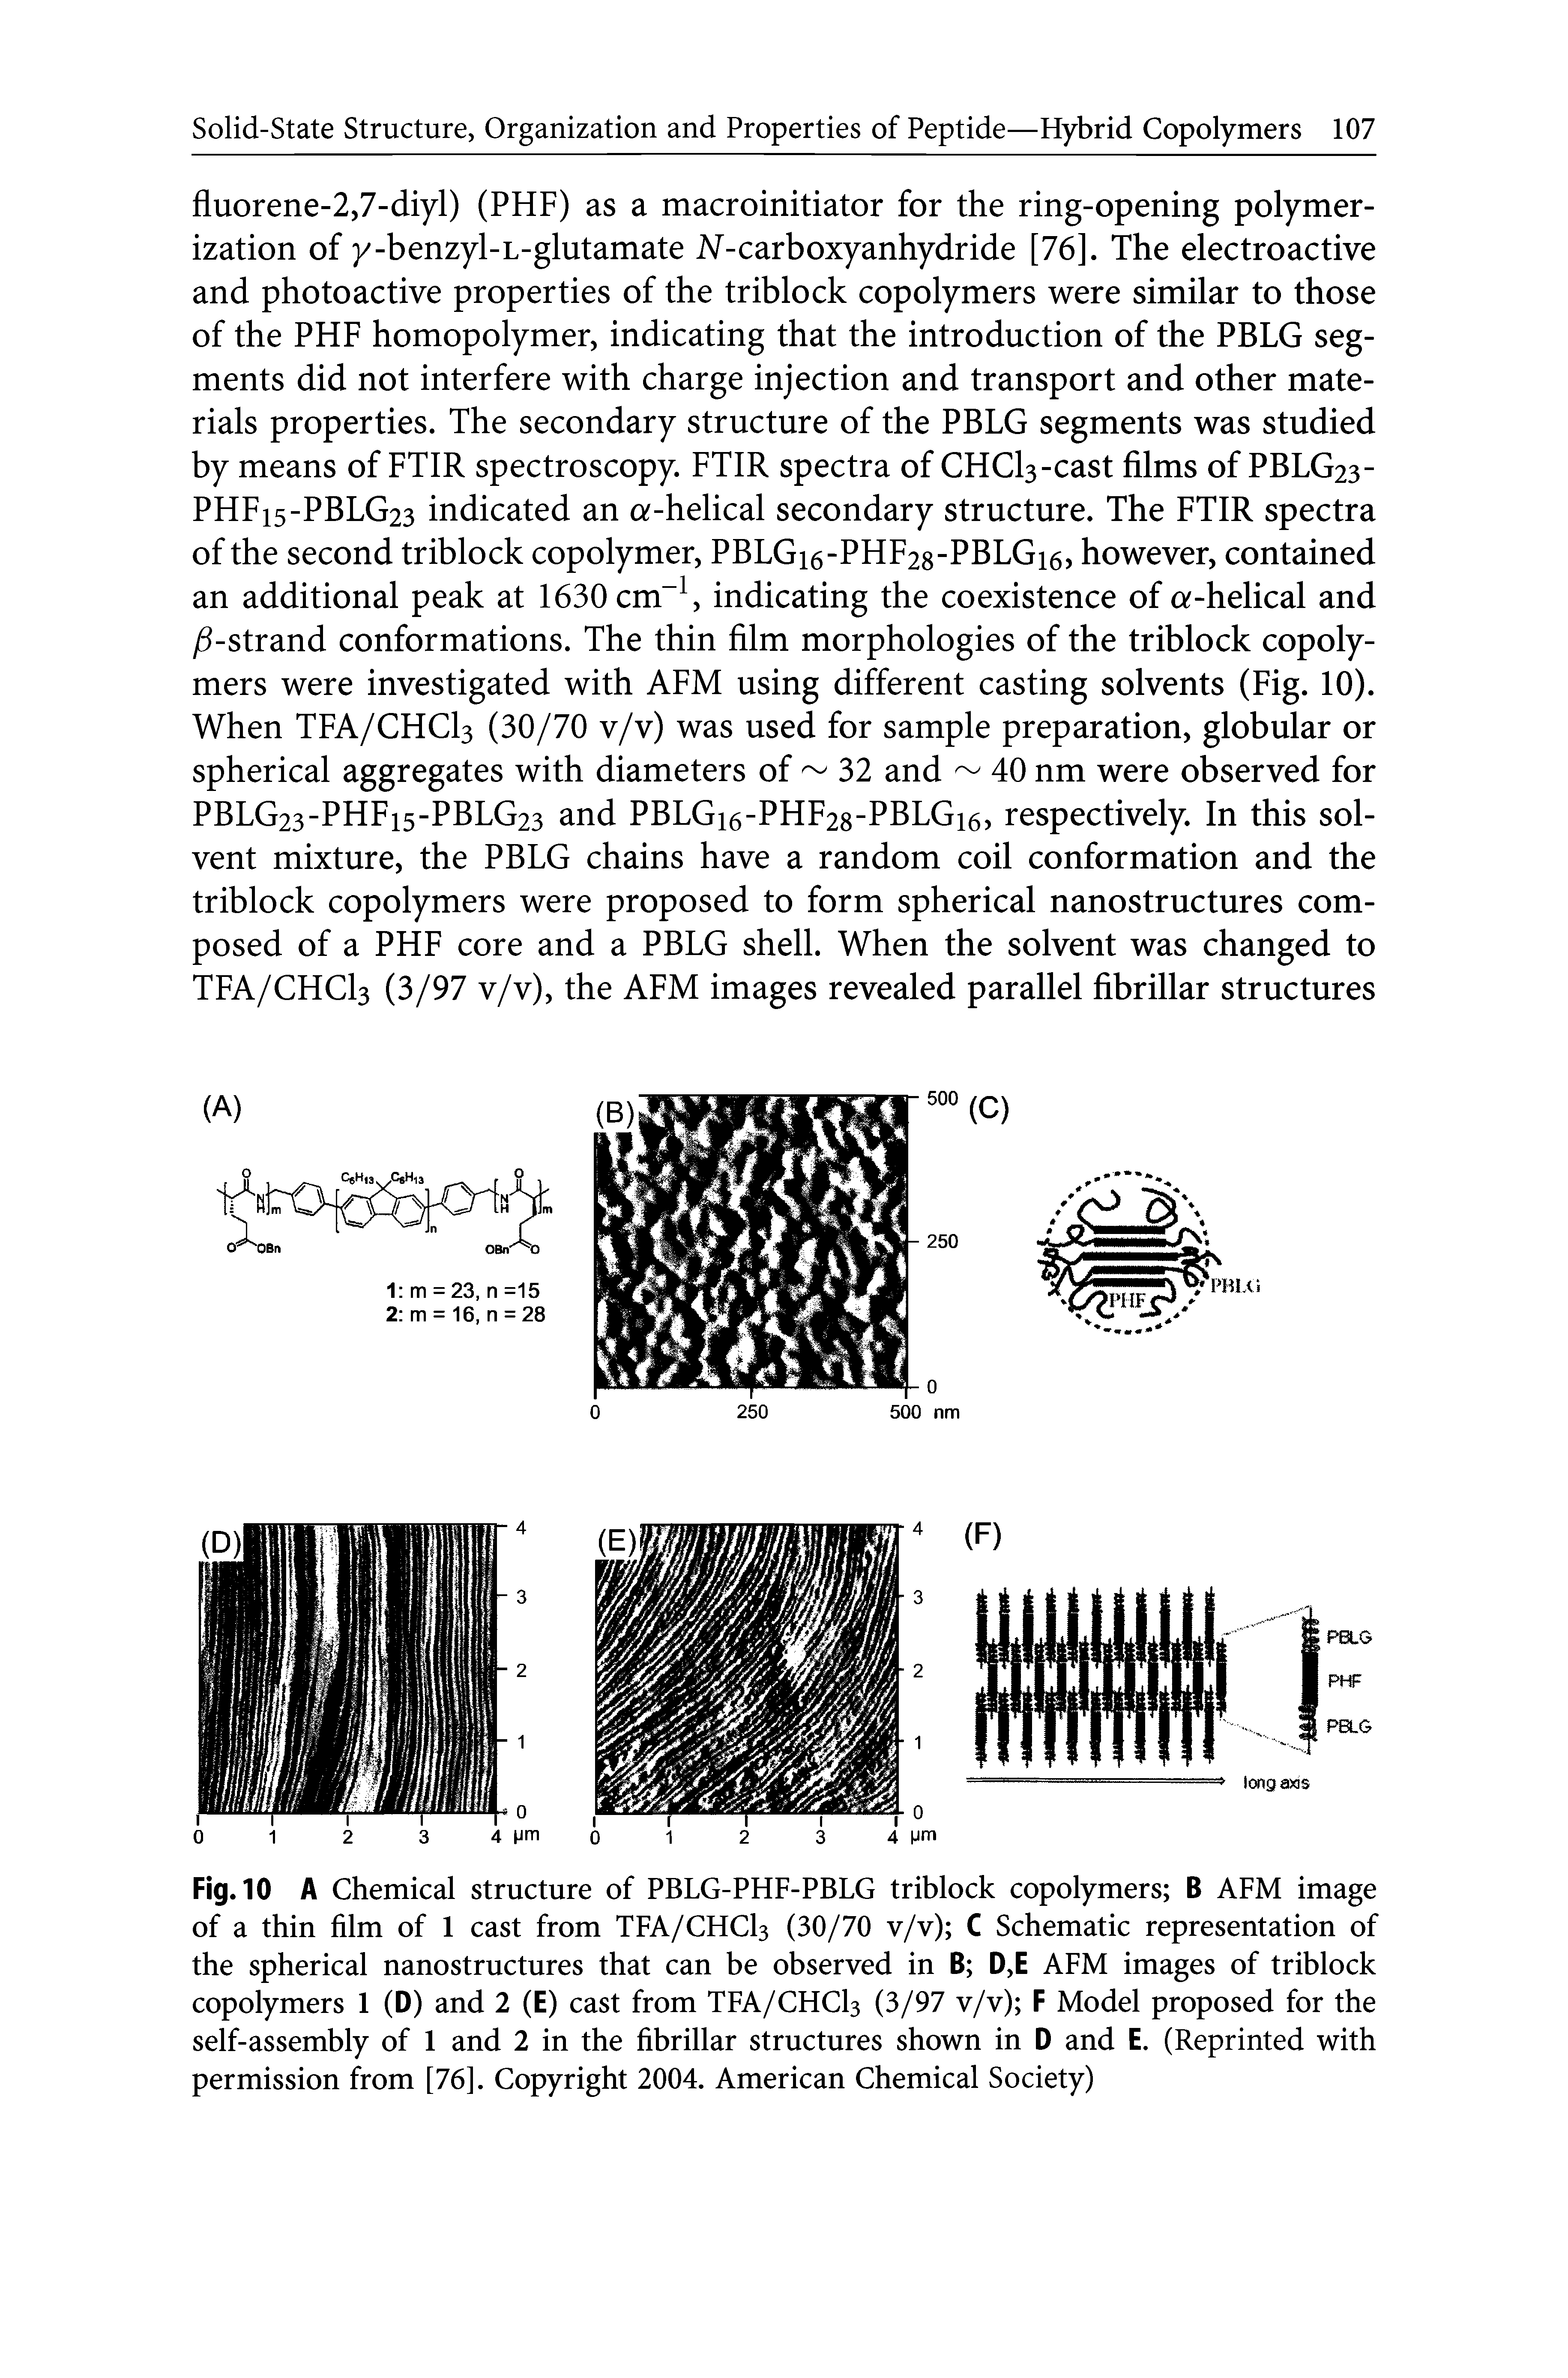 Fig. 10 A Chemical structure of PBLG-PHF-PBLG triblock copolymers B AFM image of a thin film of 1 cast from TFA/CHCI3 (30/70 v/v) C Schematic representation of the spherical nanostructures that can be observed in B D,E AFM images of triblock copolymers 1 (D) and 2 (E) cast from TFA/CHCI3 (3/97 v/v) F Model proposed for the self-assembly of 1 and 2 in the fibrillar structures shown in D and E. (Reprinted with permission from [76]. Copyright 2004. American Chemical Society)...